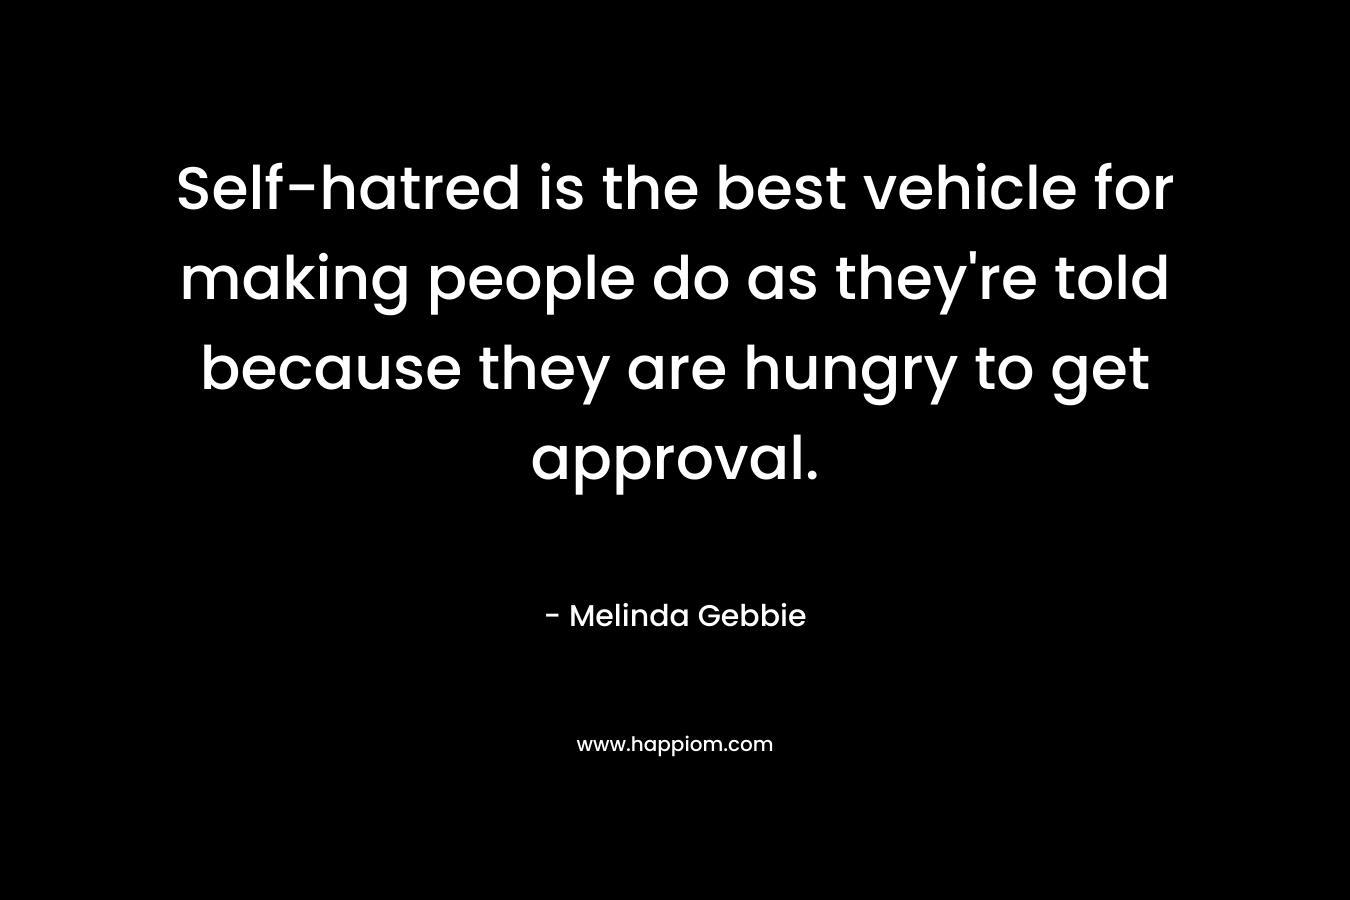 Self-hatred is the best vehicle for making people do as they’re told because they are hungry to get approval. – Melinda Gebbie